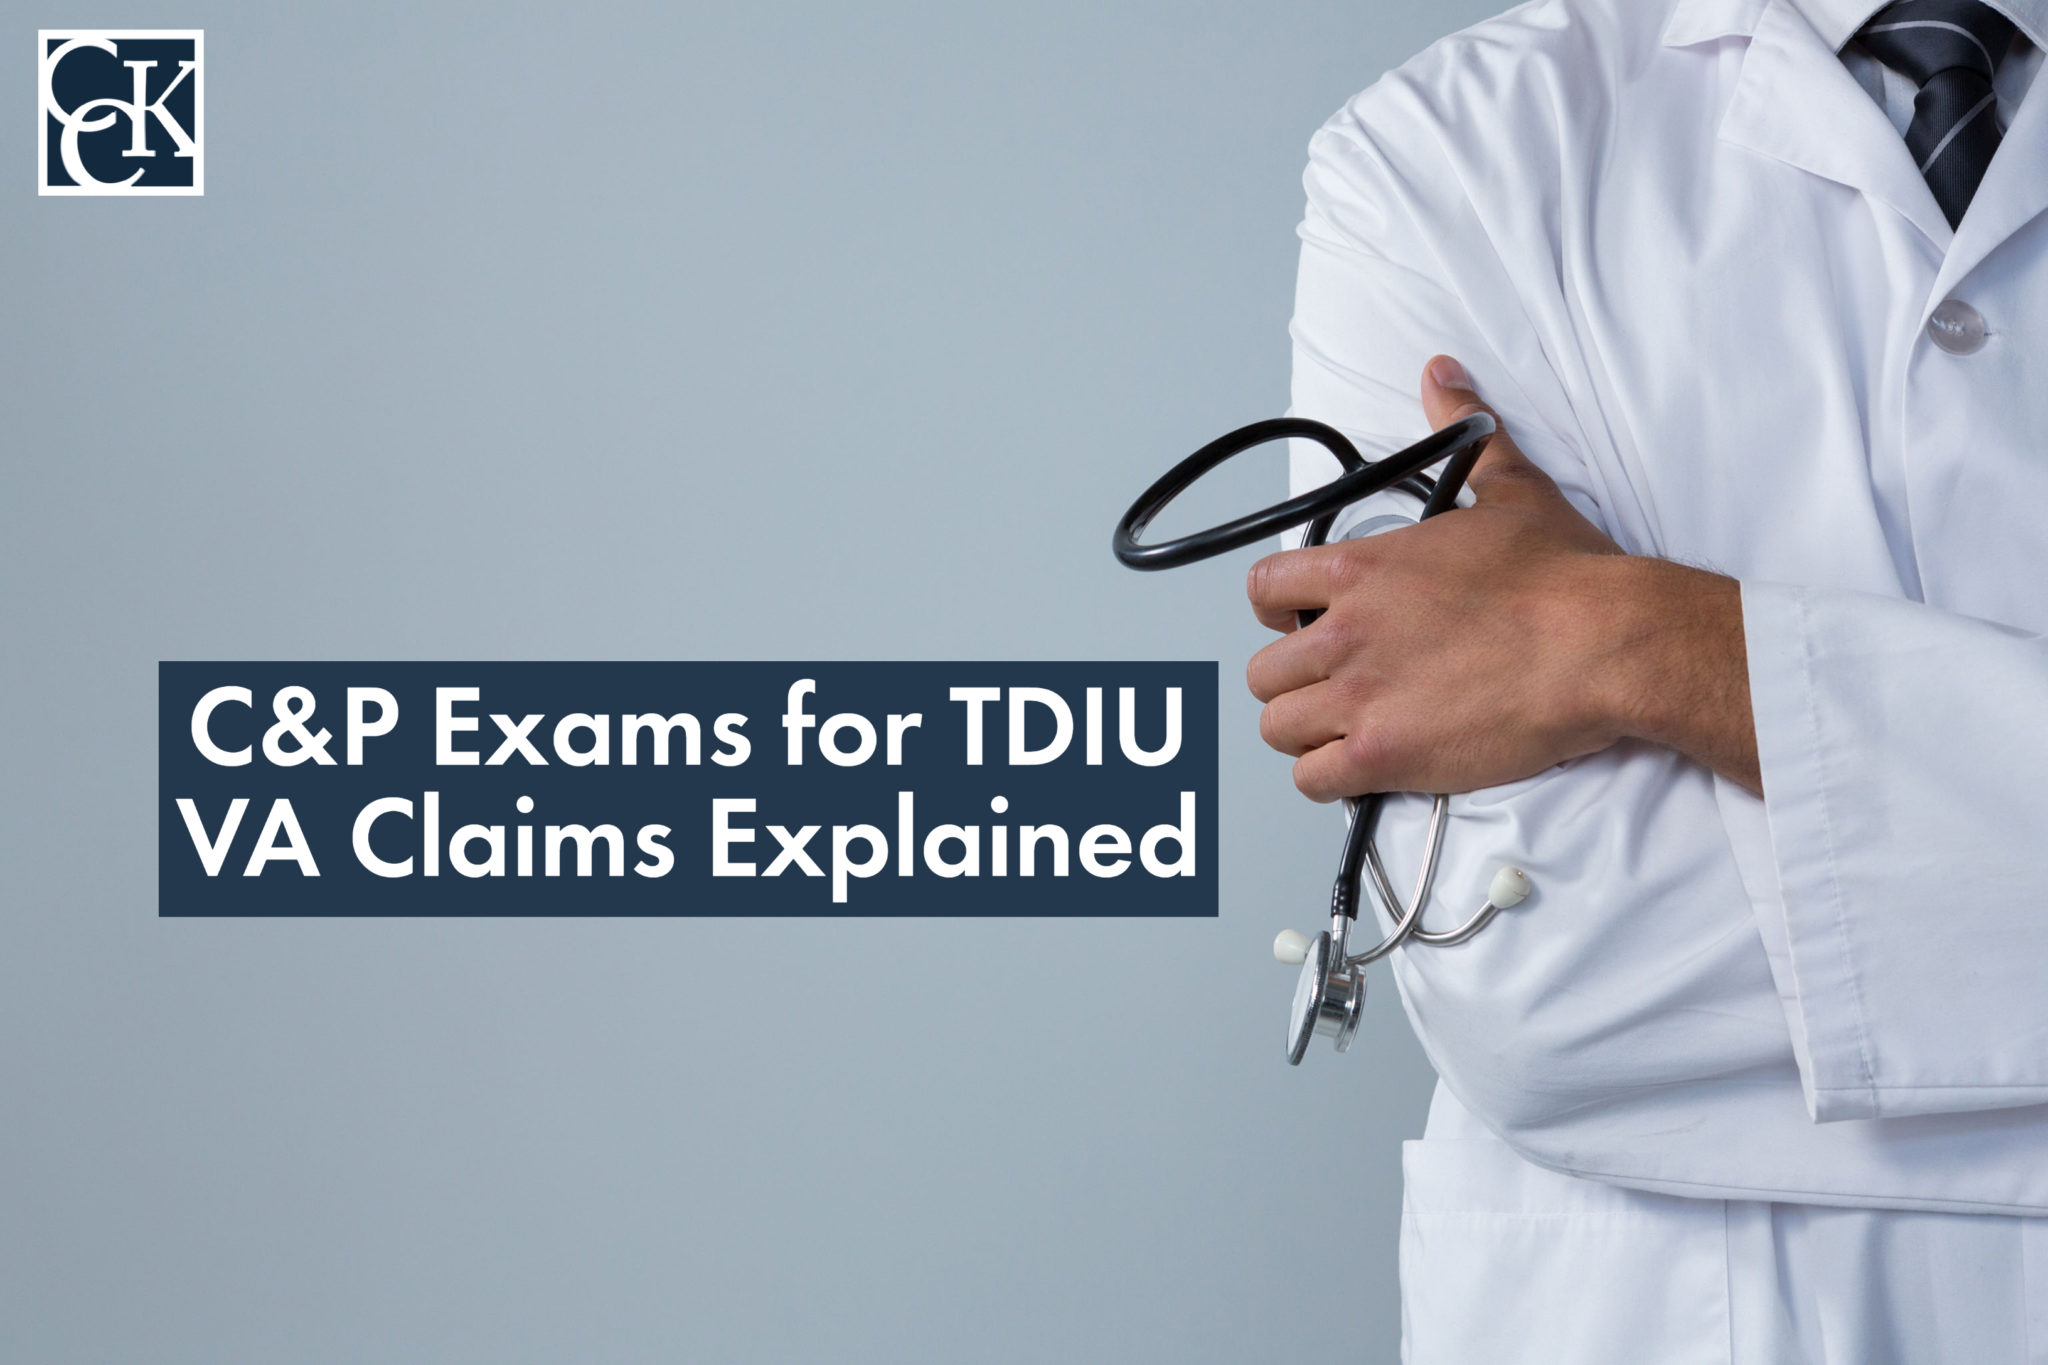 C&P Exams for TDIU VA Claims Explained CCK Law